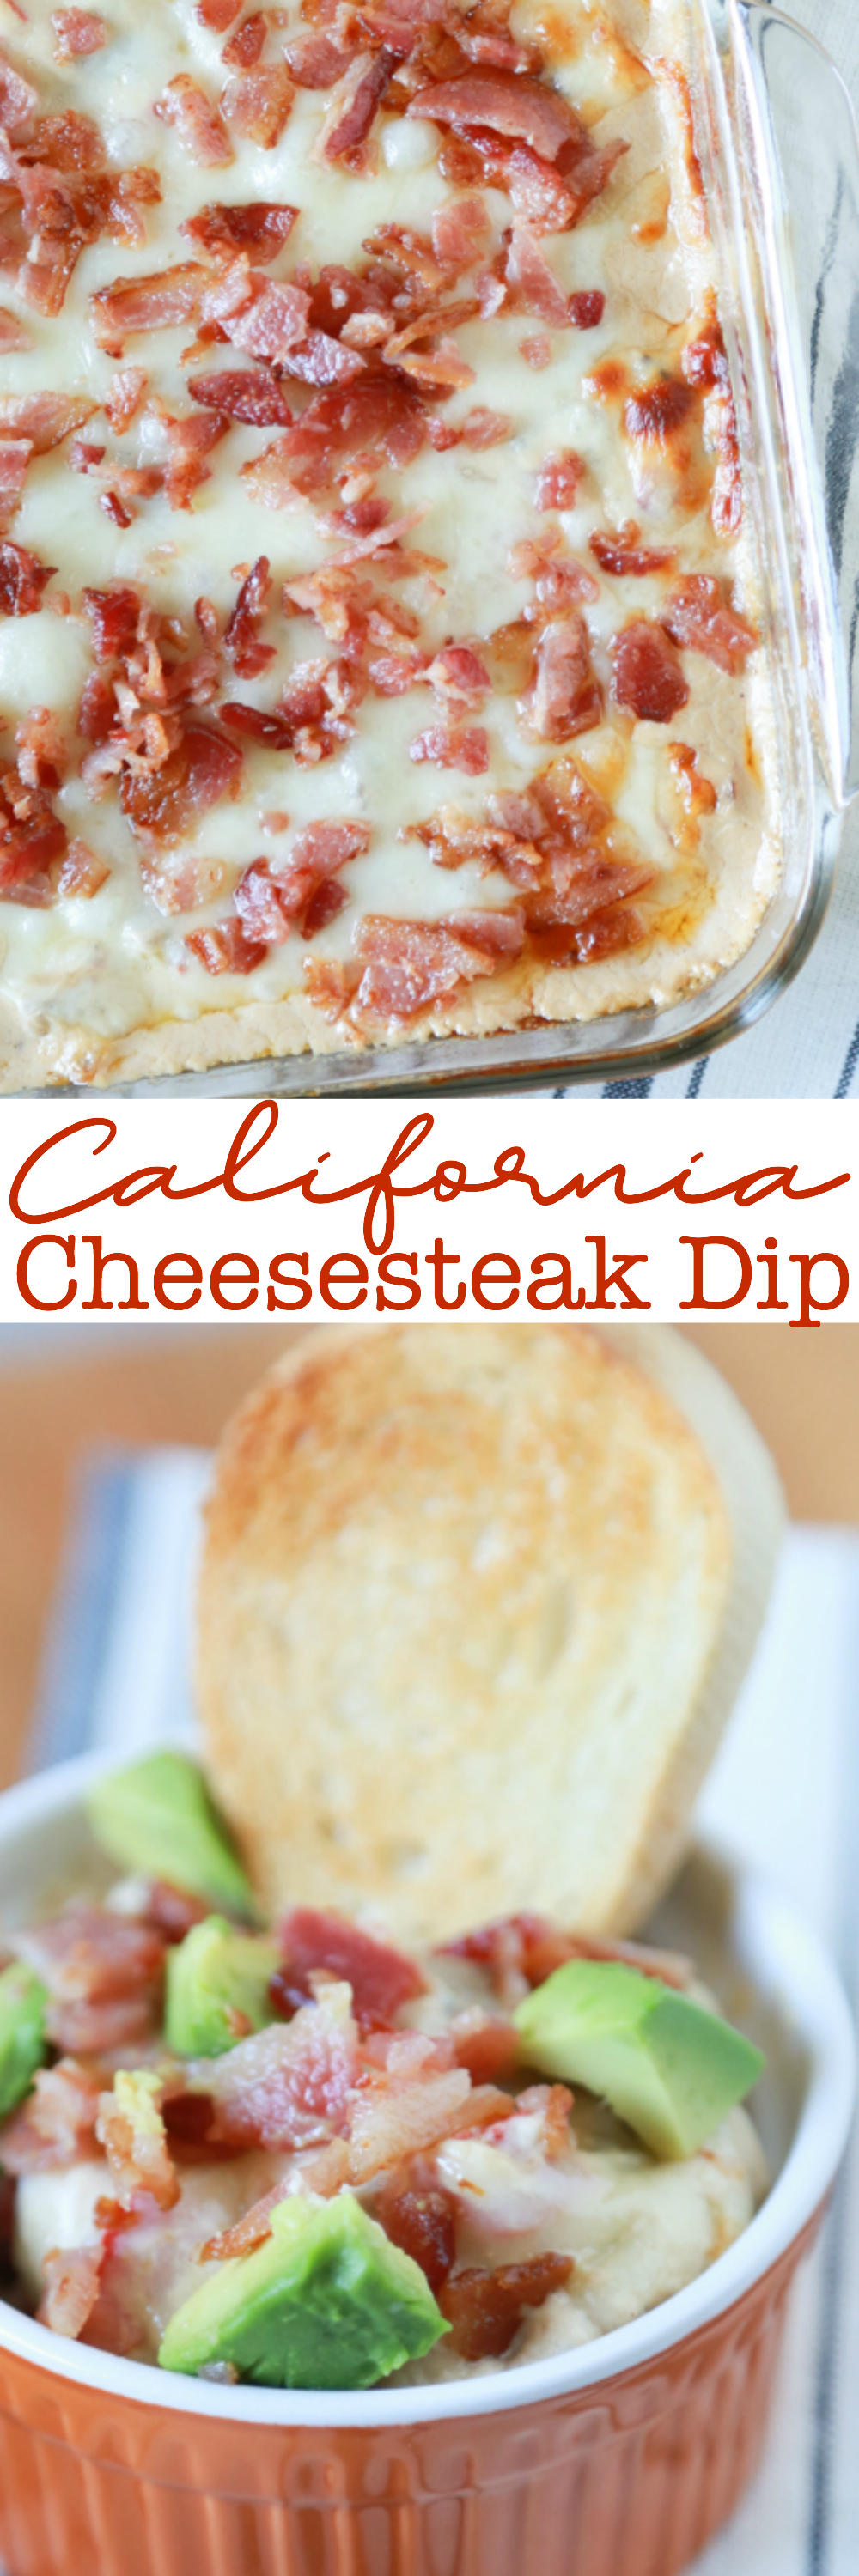 Enjoy some of the flavors of Philly & California with this incredibly indulgent California Cheesesteak Dip! Serve with toasted white crusty bread and enjoy.